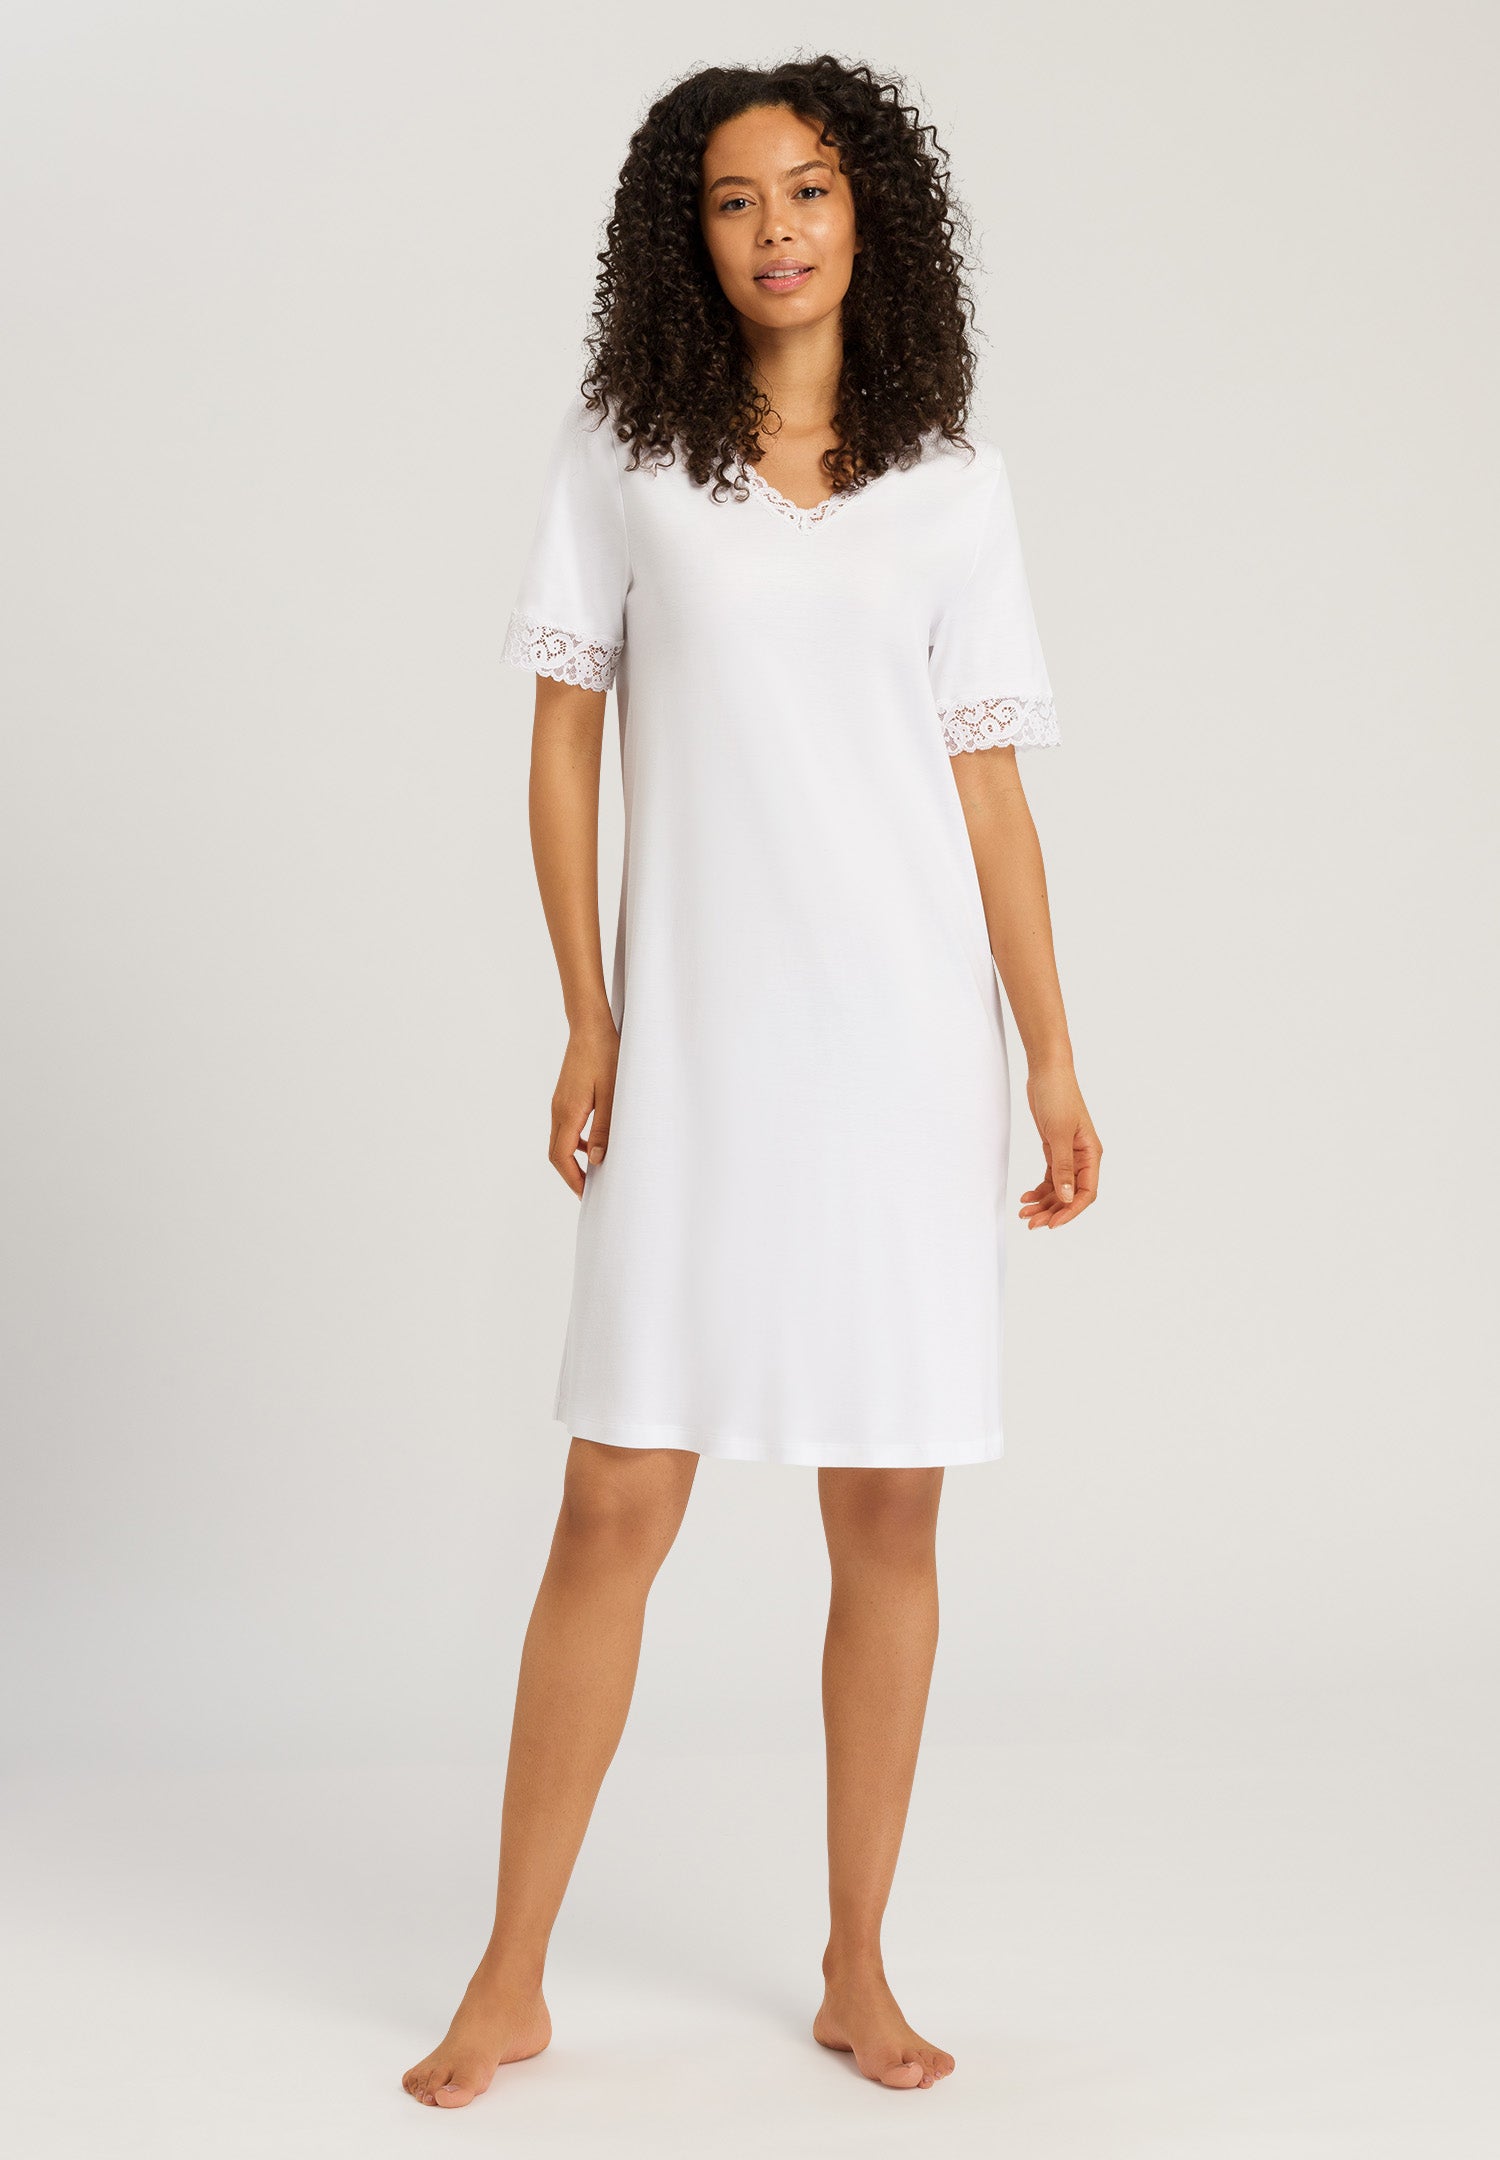 77040 Moments S/Slv Nightgown 100 Cm - 101 White